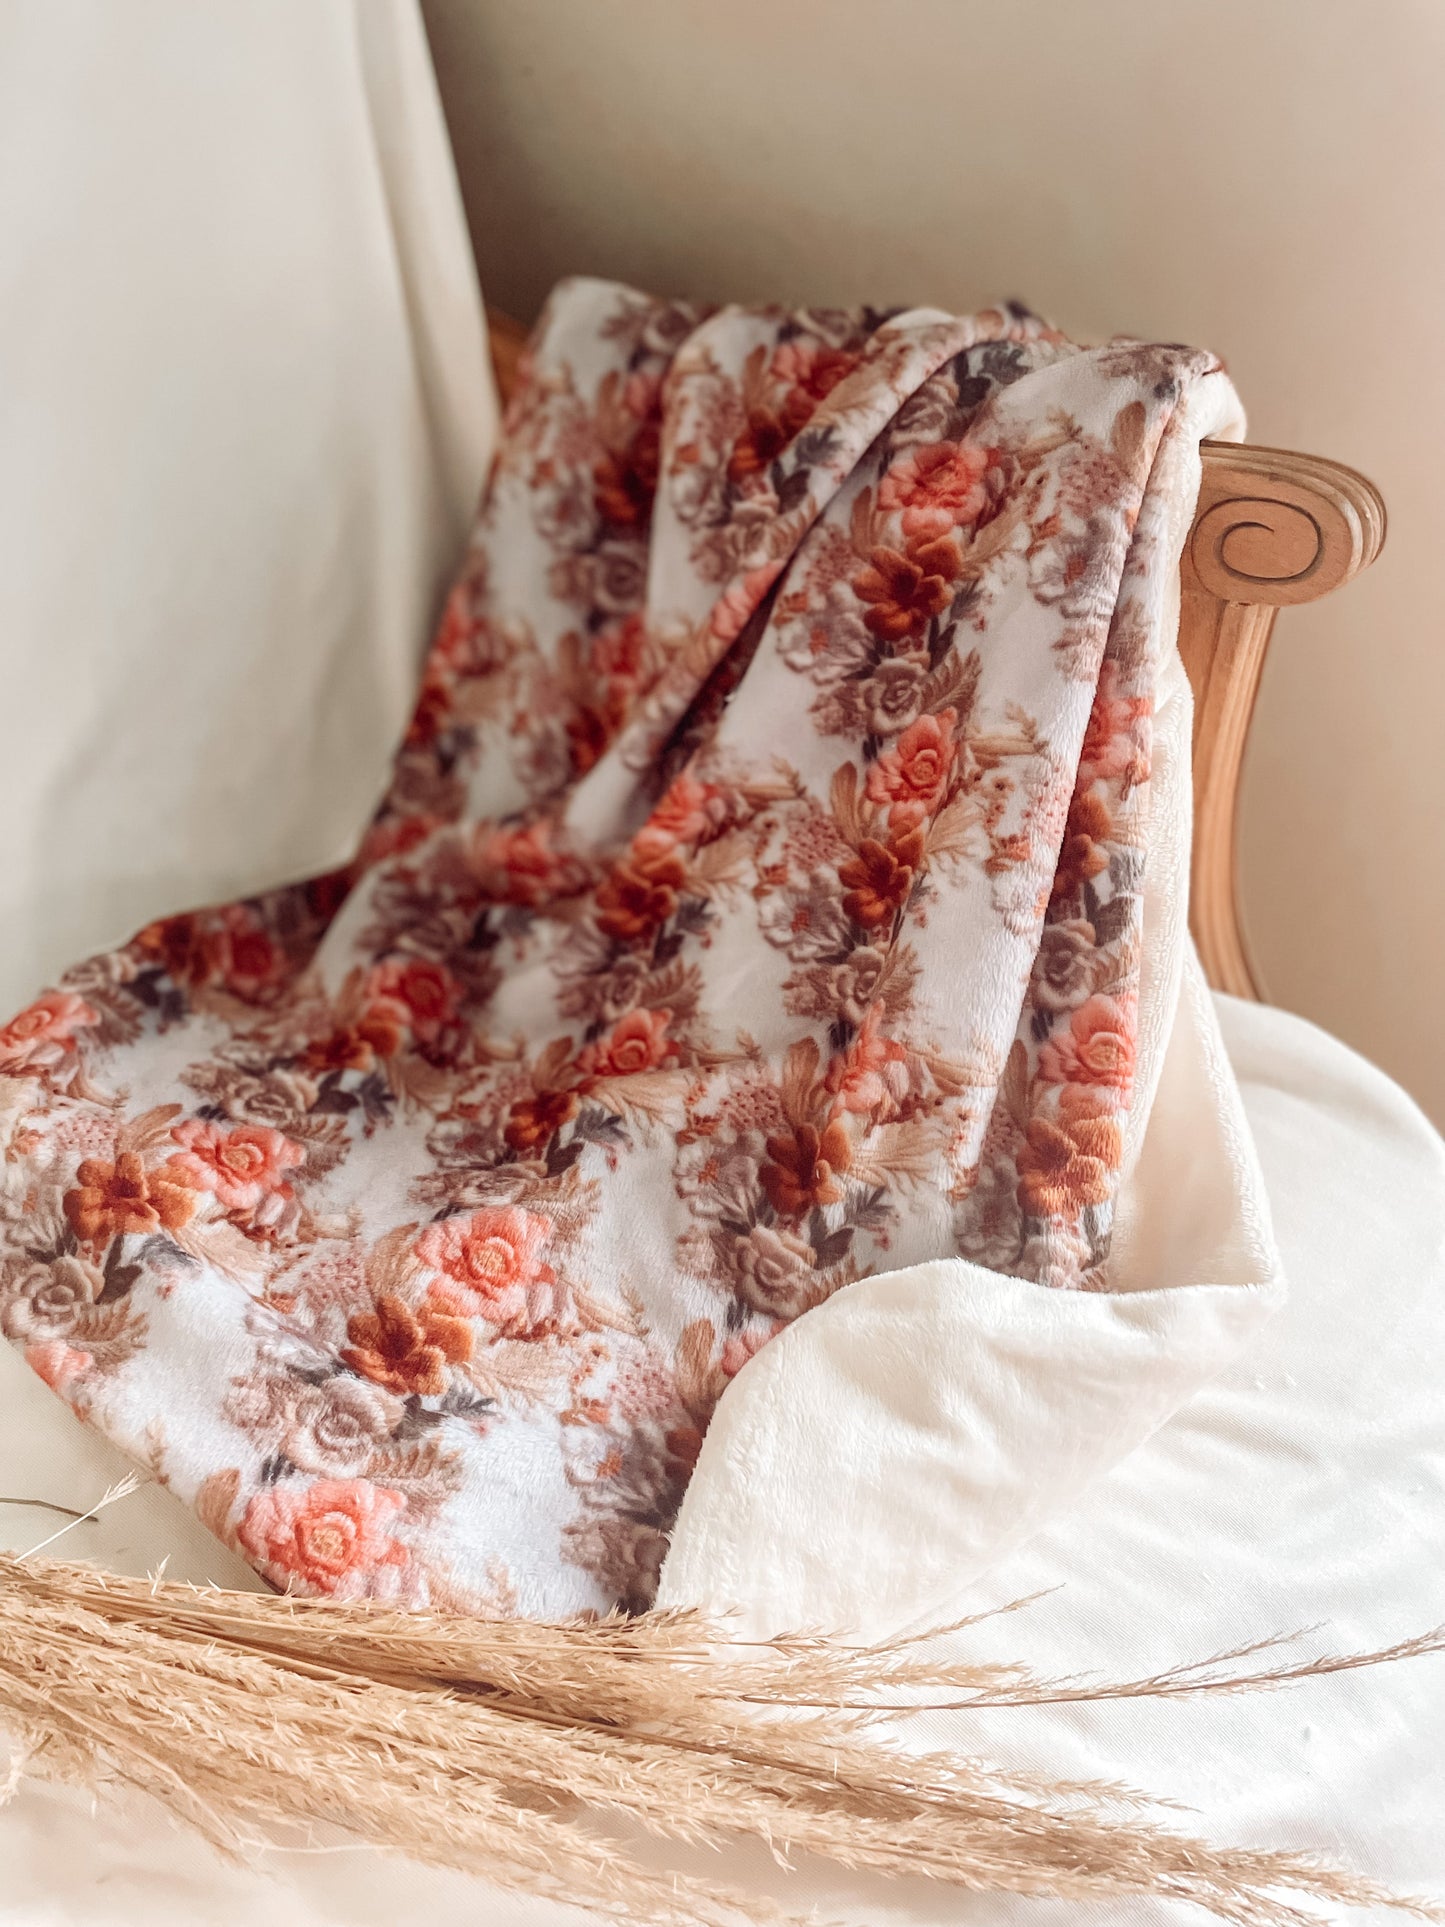 Minky blanket "Vintage/smooth cream embroidery"